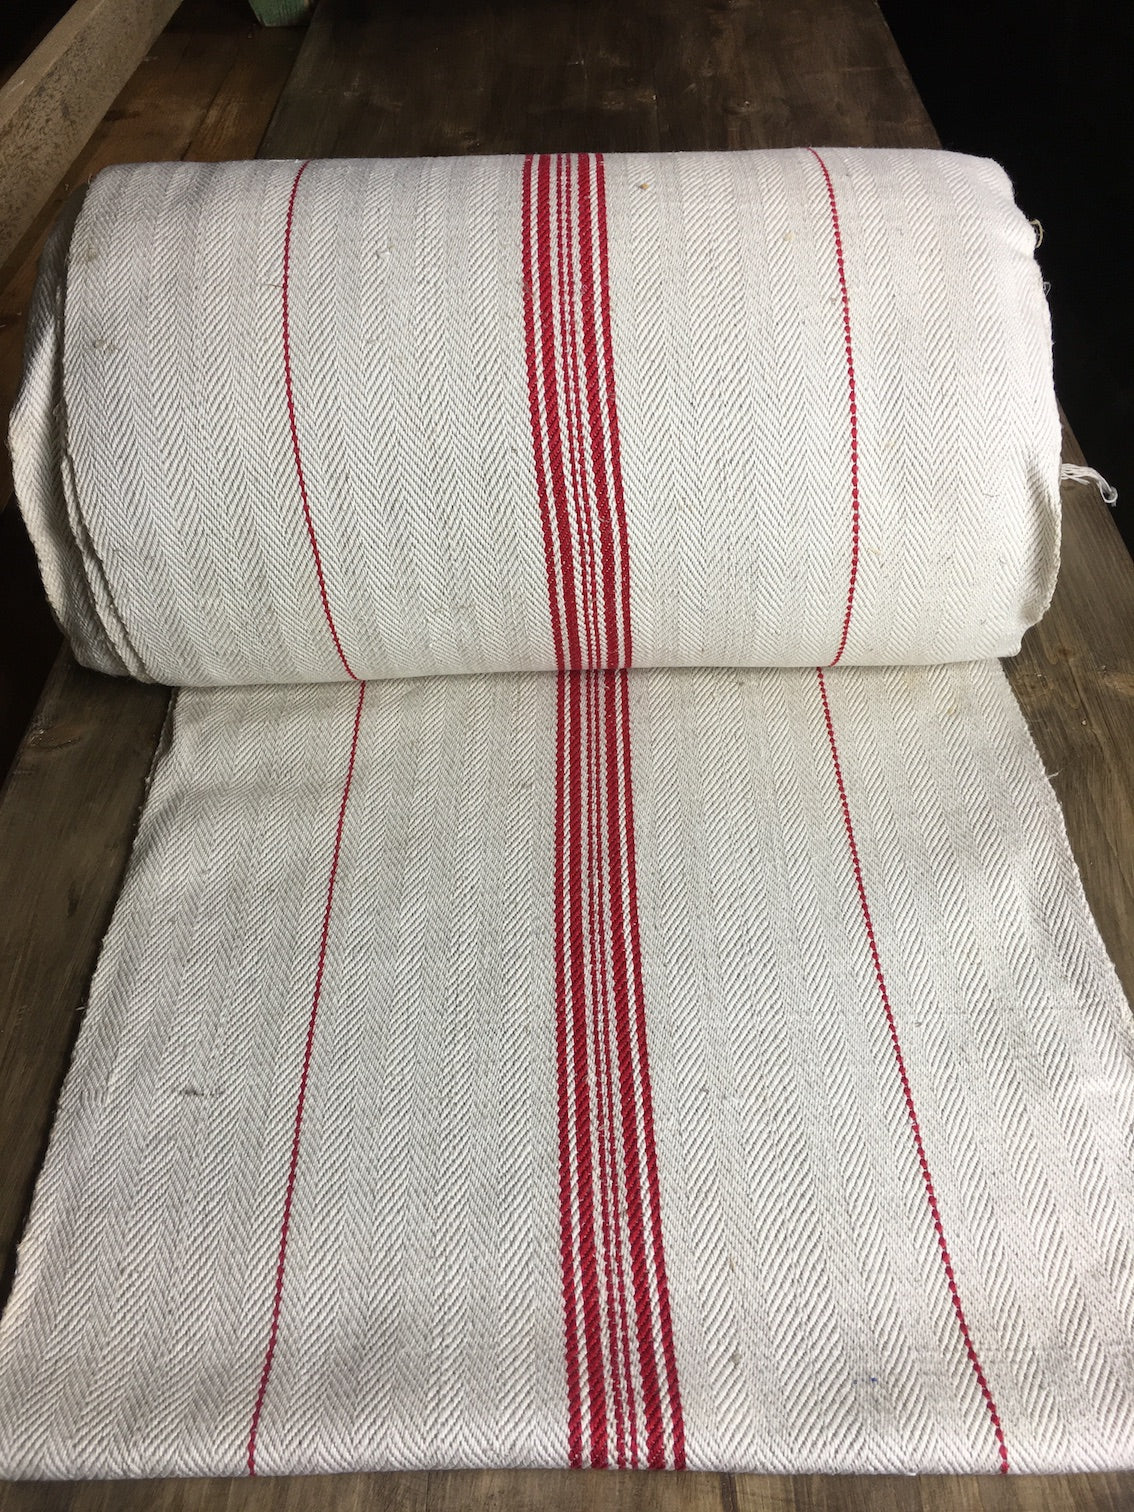 Vintage French Linen Roll 1940s  #3037(Read Information About This Item)